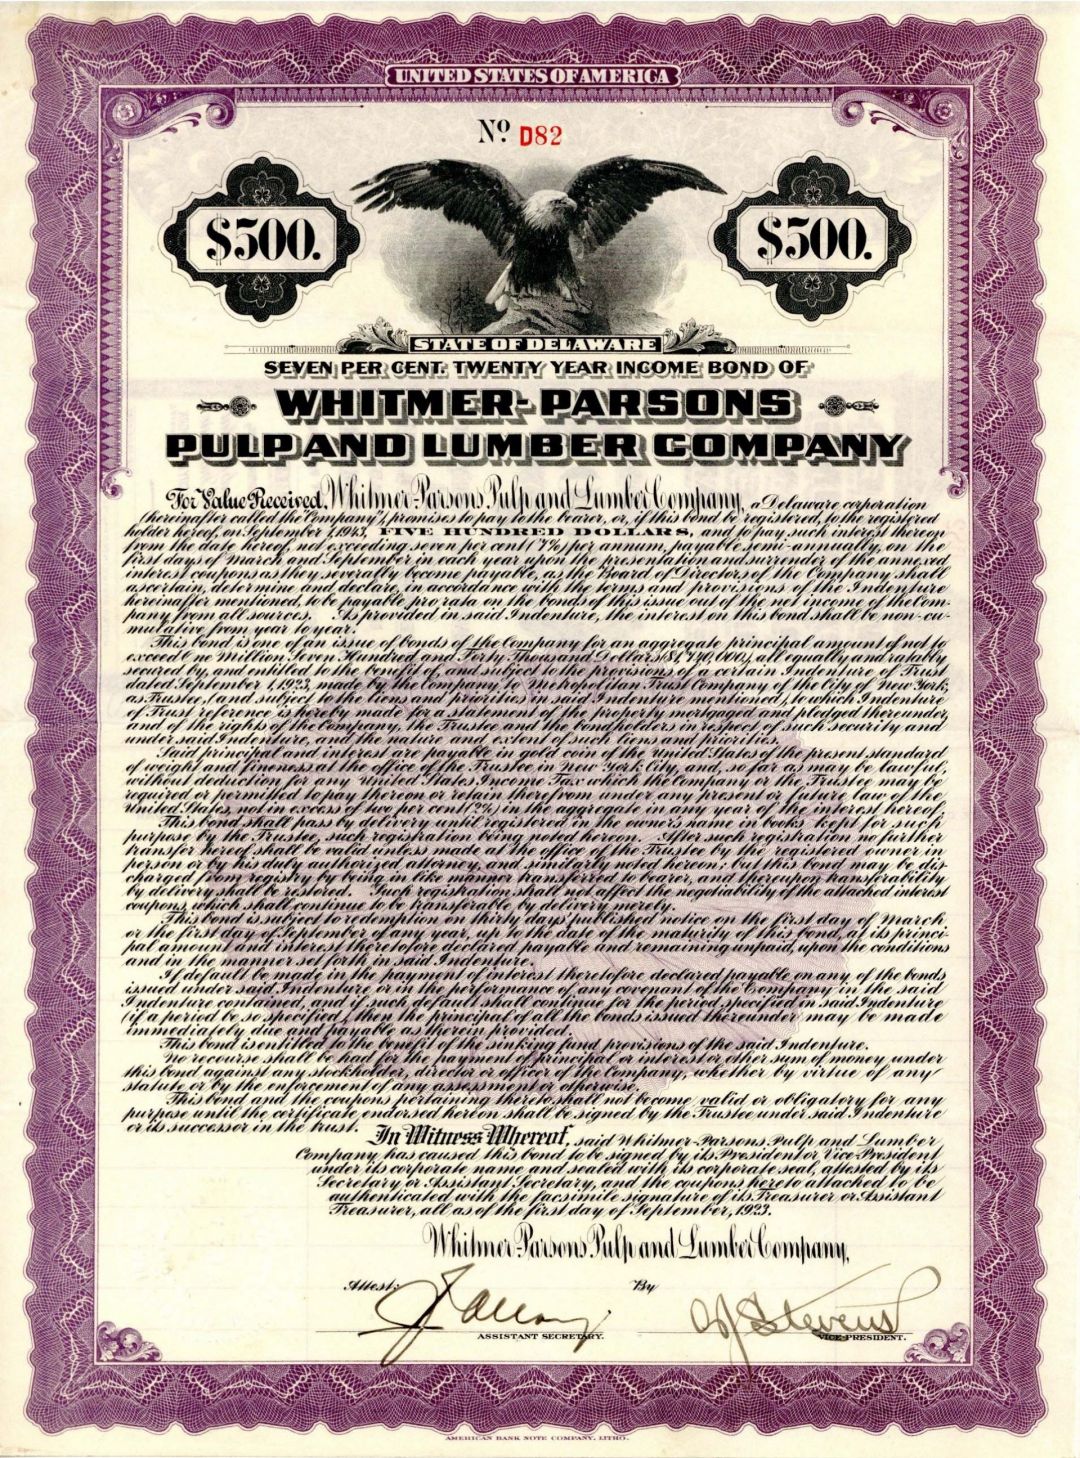 Whitmer-Parsons Pulp and Lumber Co. - $500 or $100 Bond